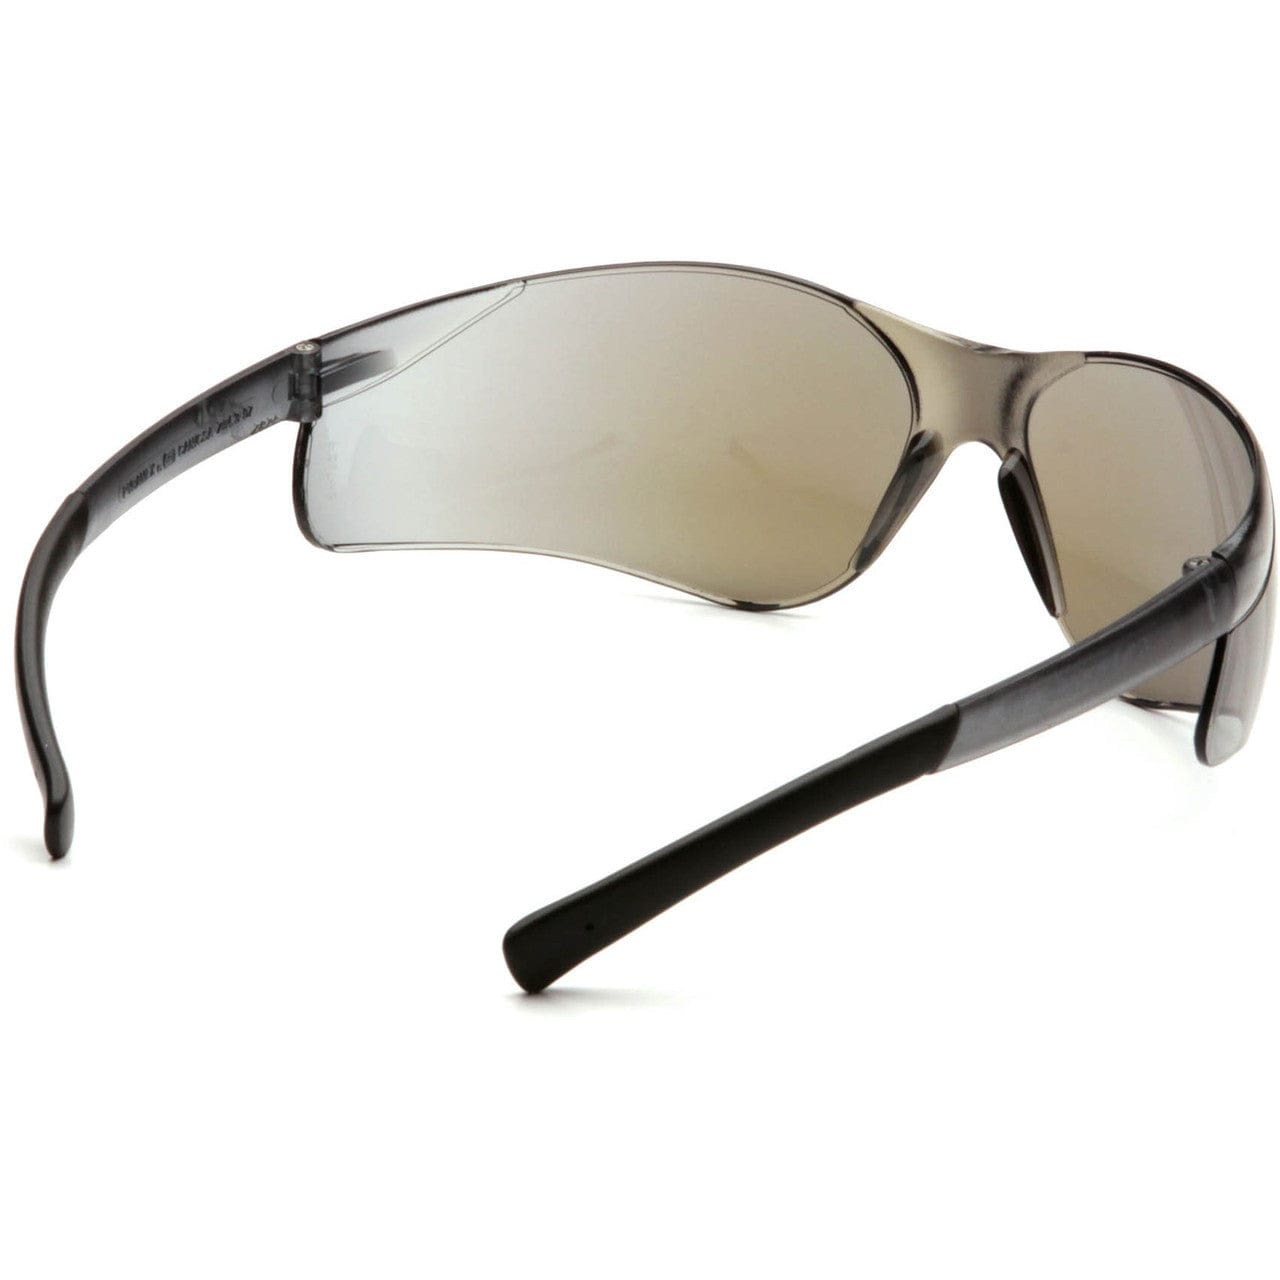 Pyramex Ztek Safety Glasses with Blue Mirror Lens S2575S Inside View